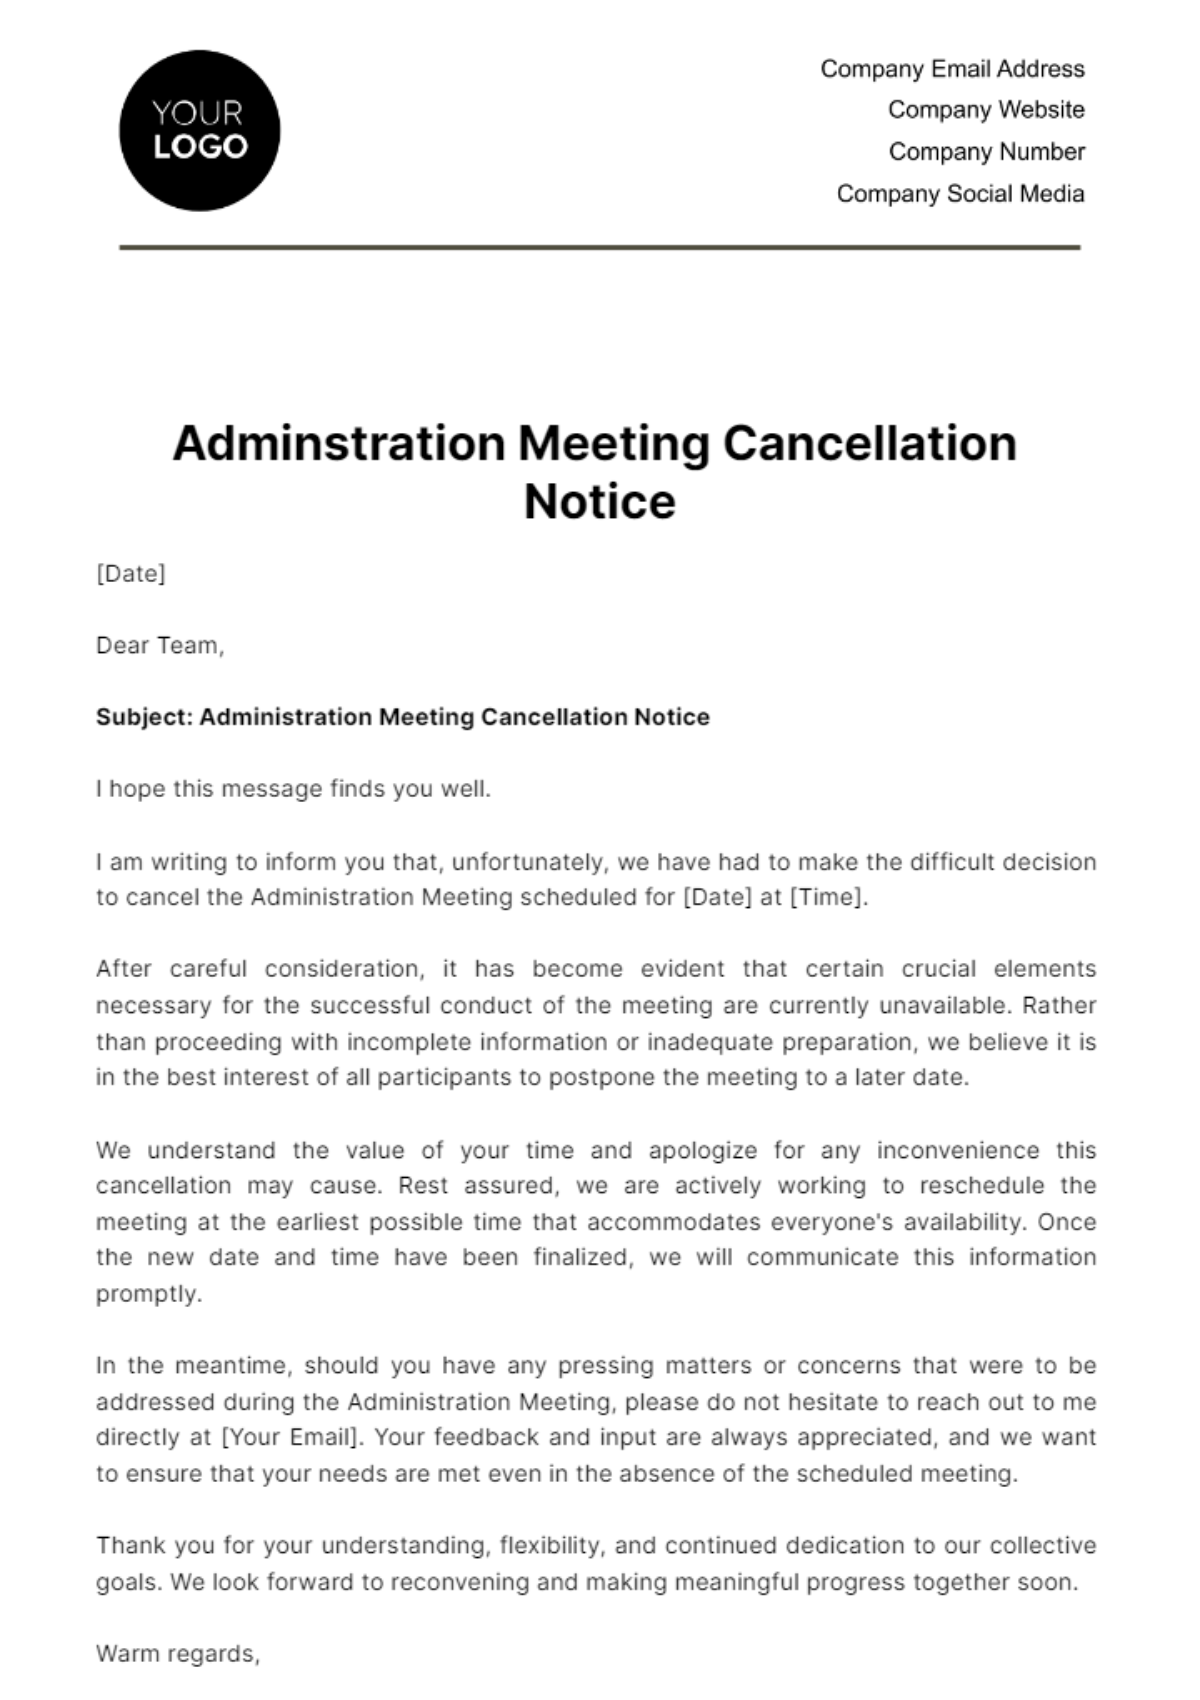 Administration Meeting Cancellation Notice Template